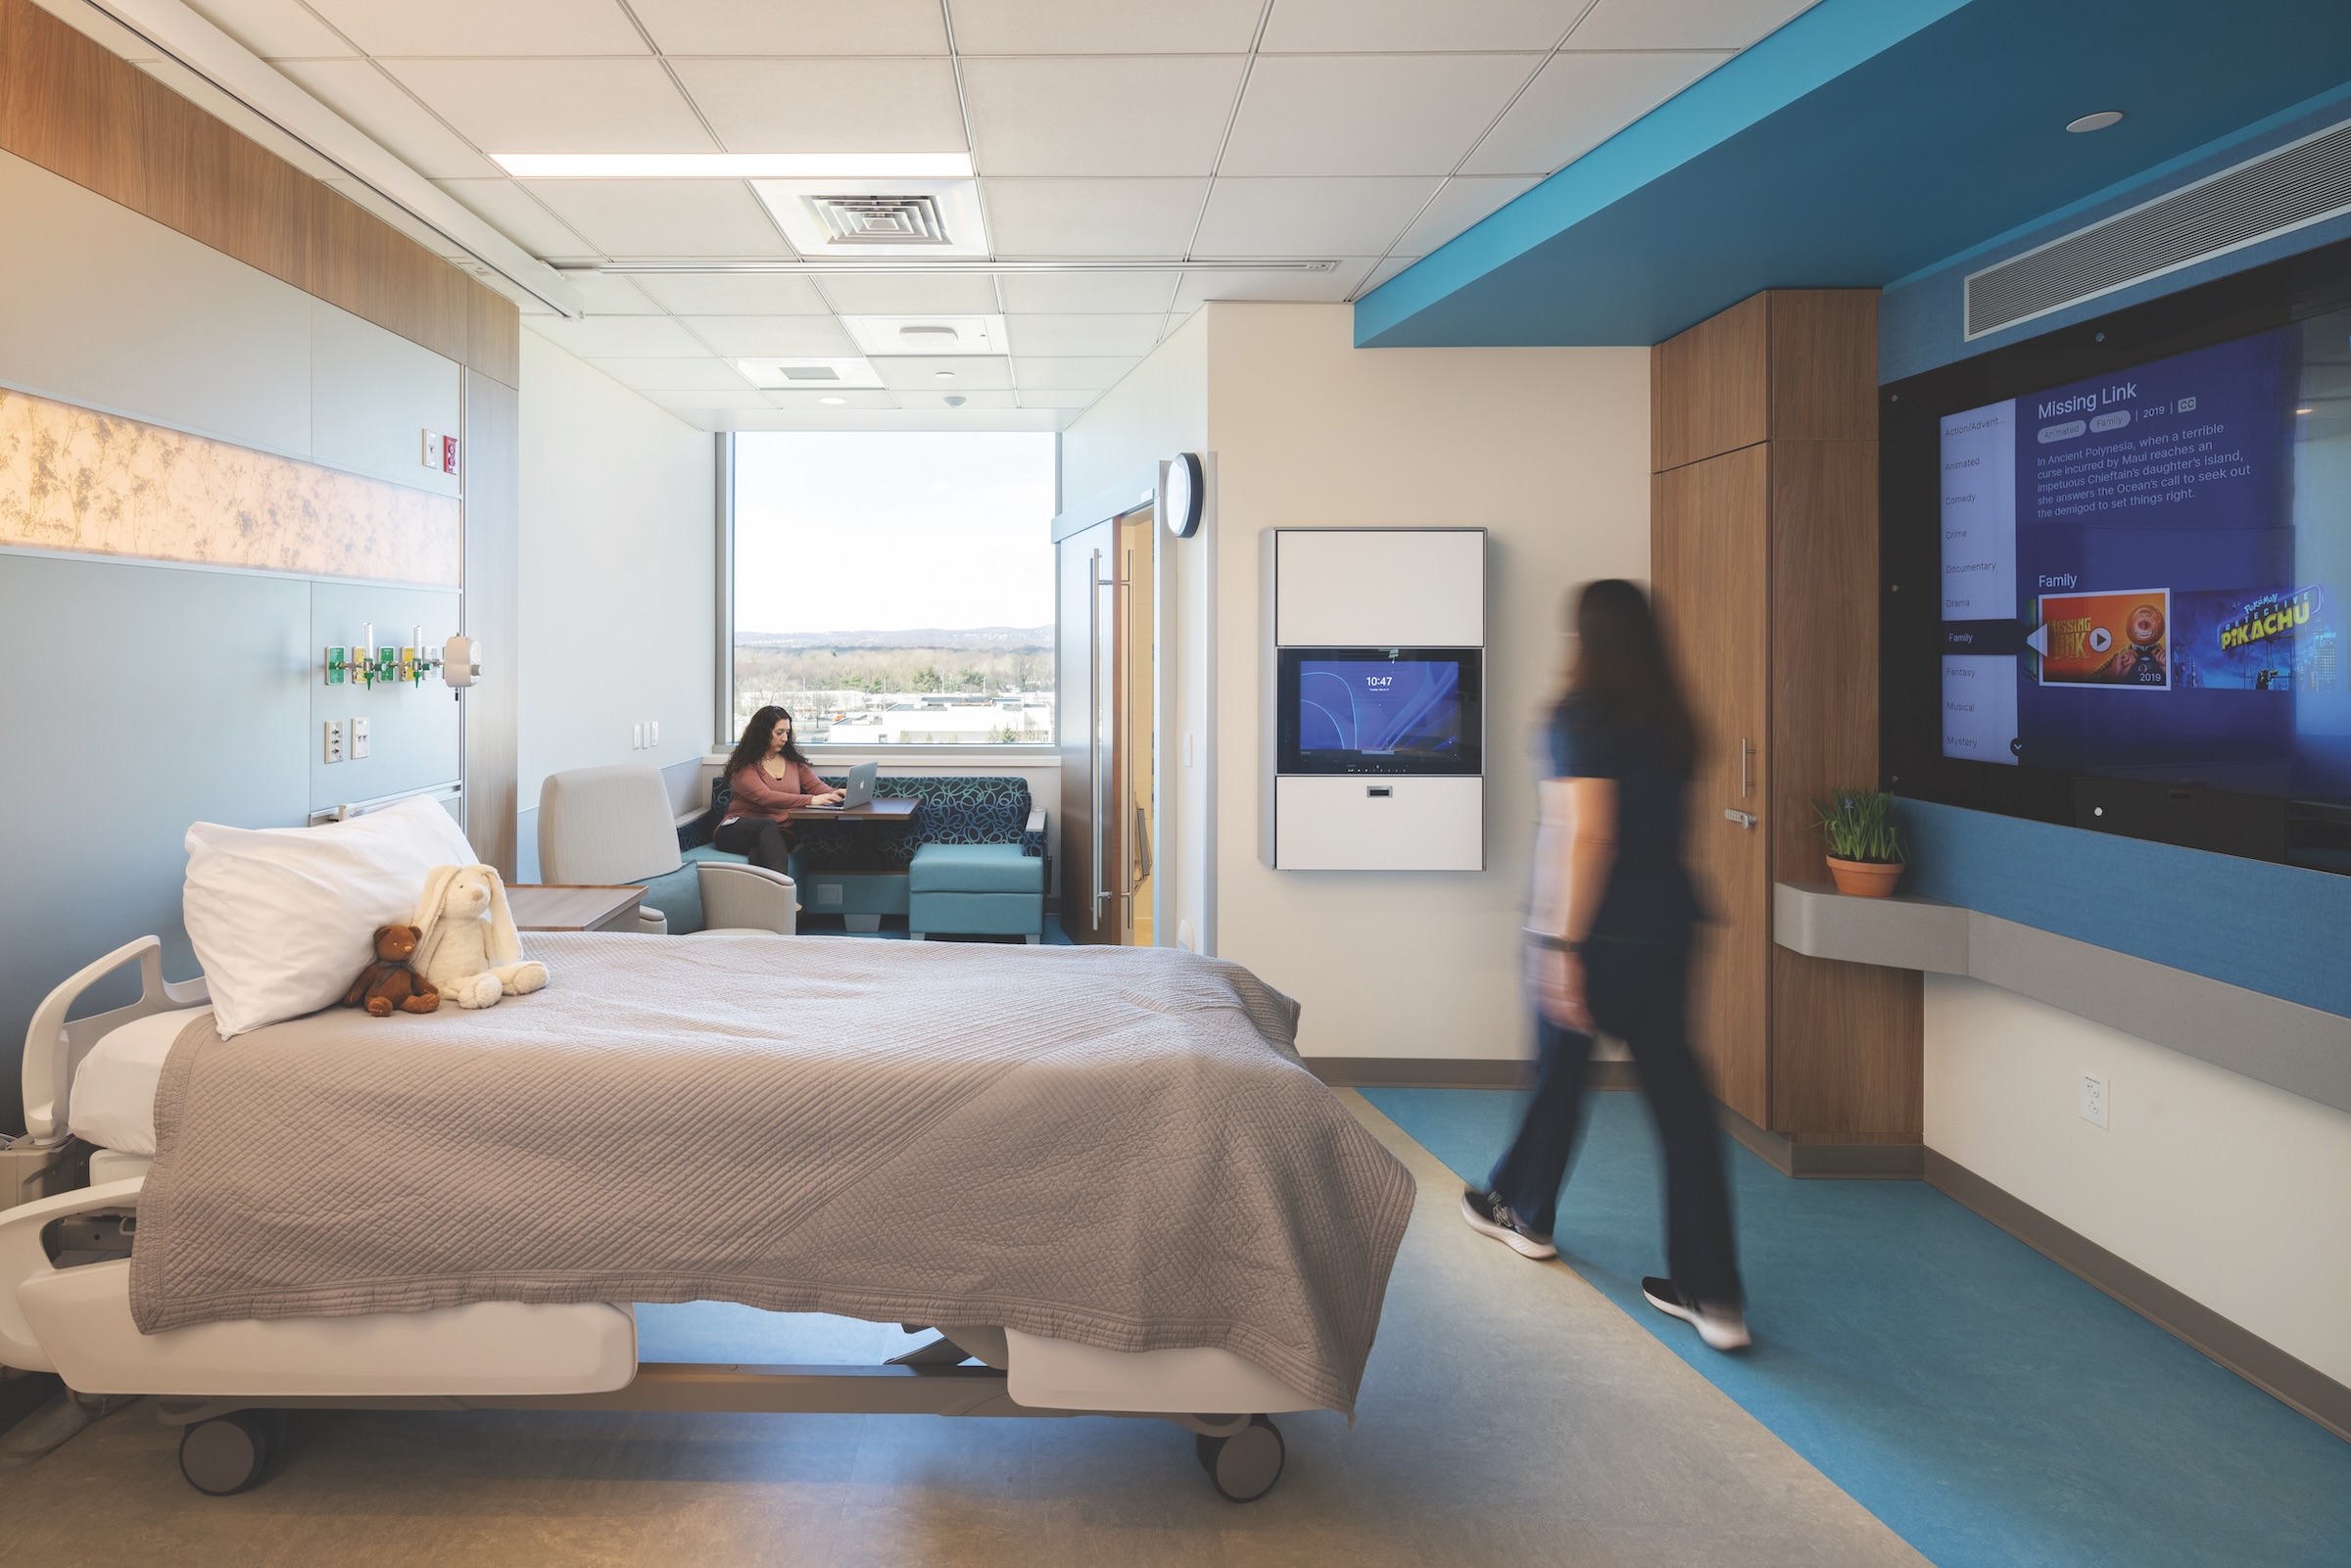 The new Valley Hospital in Paramus, N.J., checks many of the “must haves” for a modern healthcare facility. Photo: Dan Schwalm © 2024 HDR